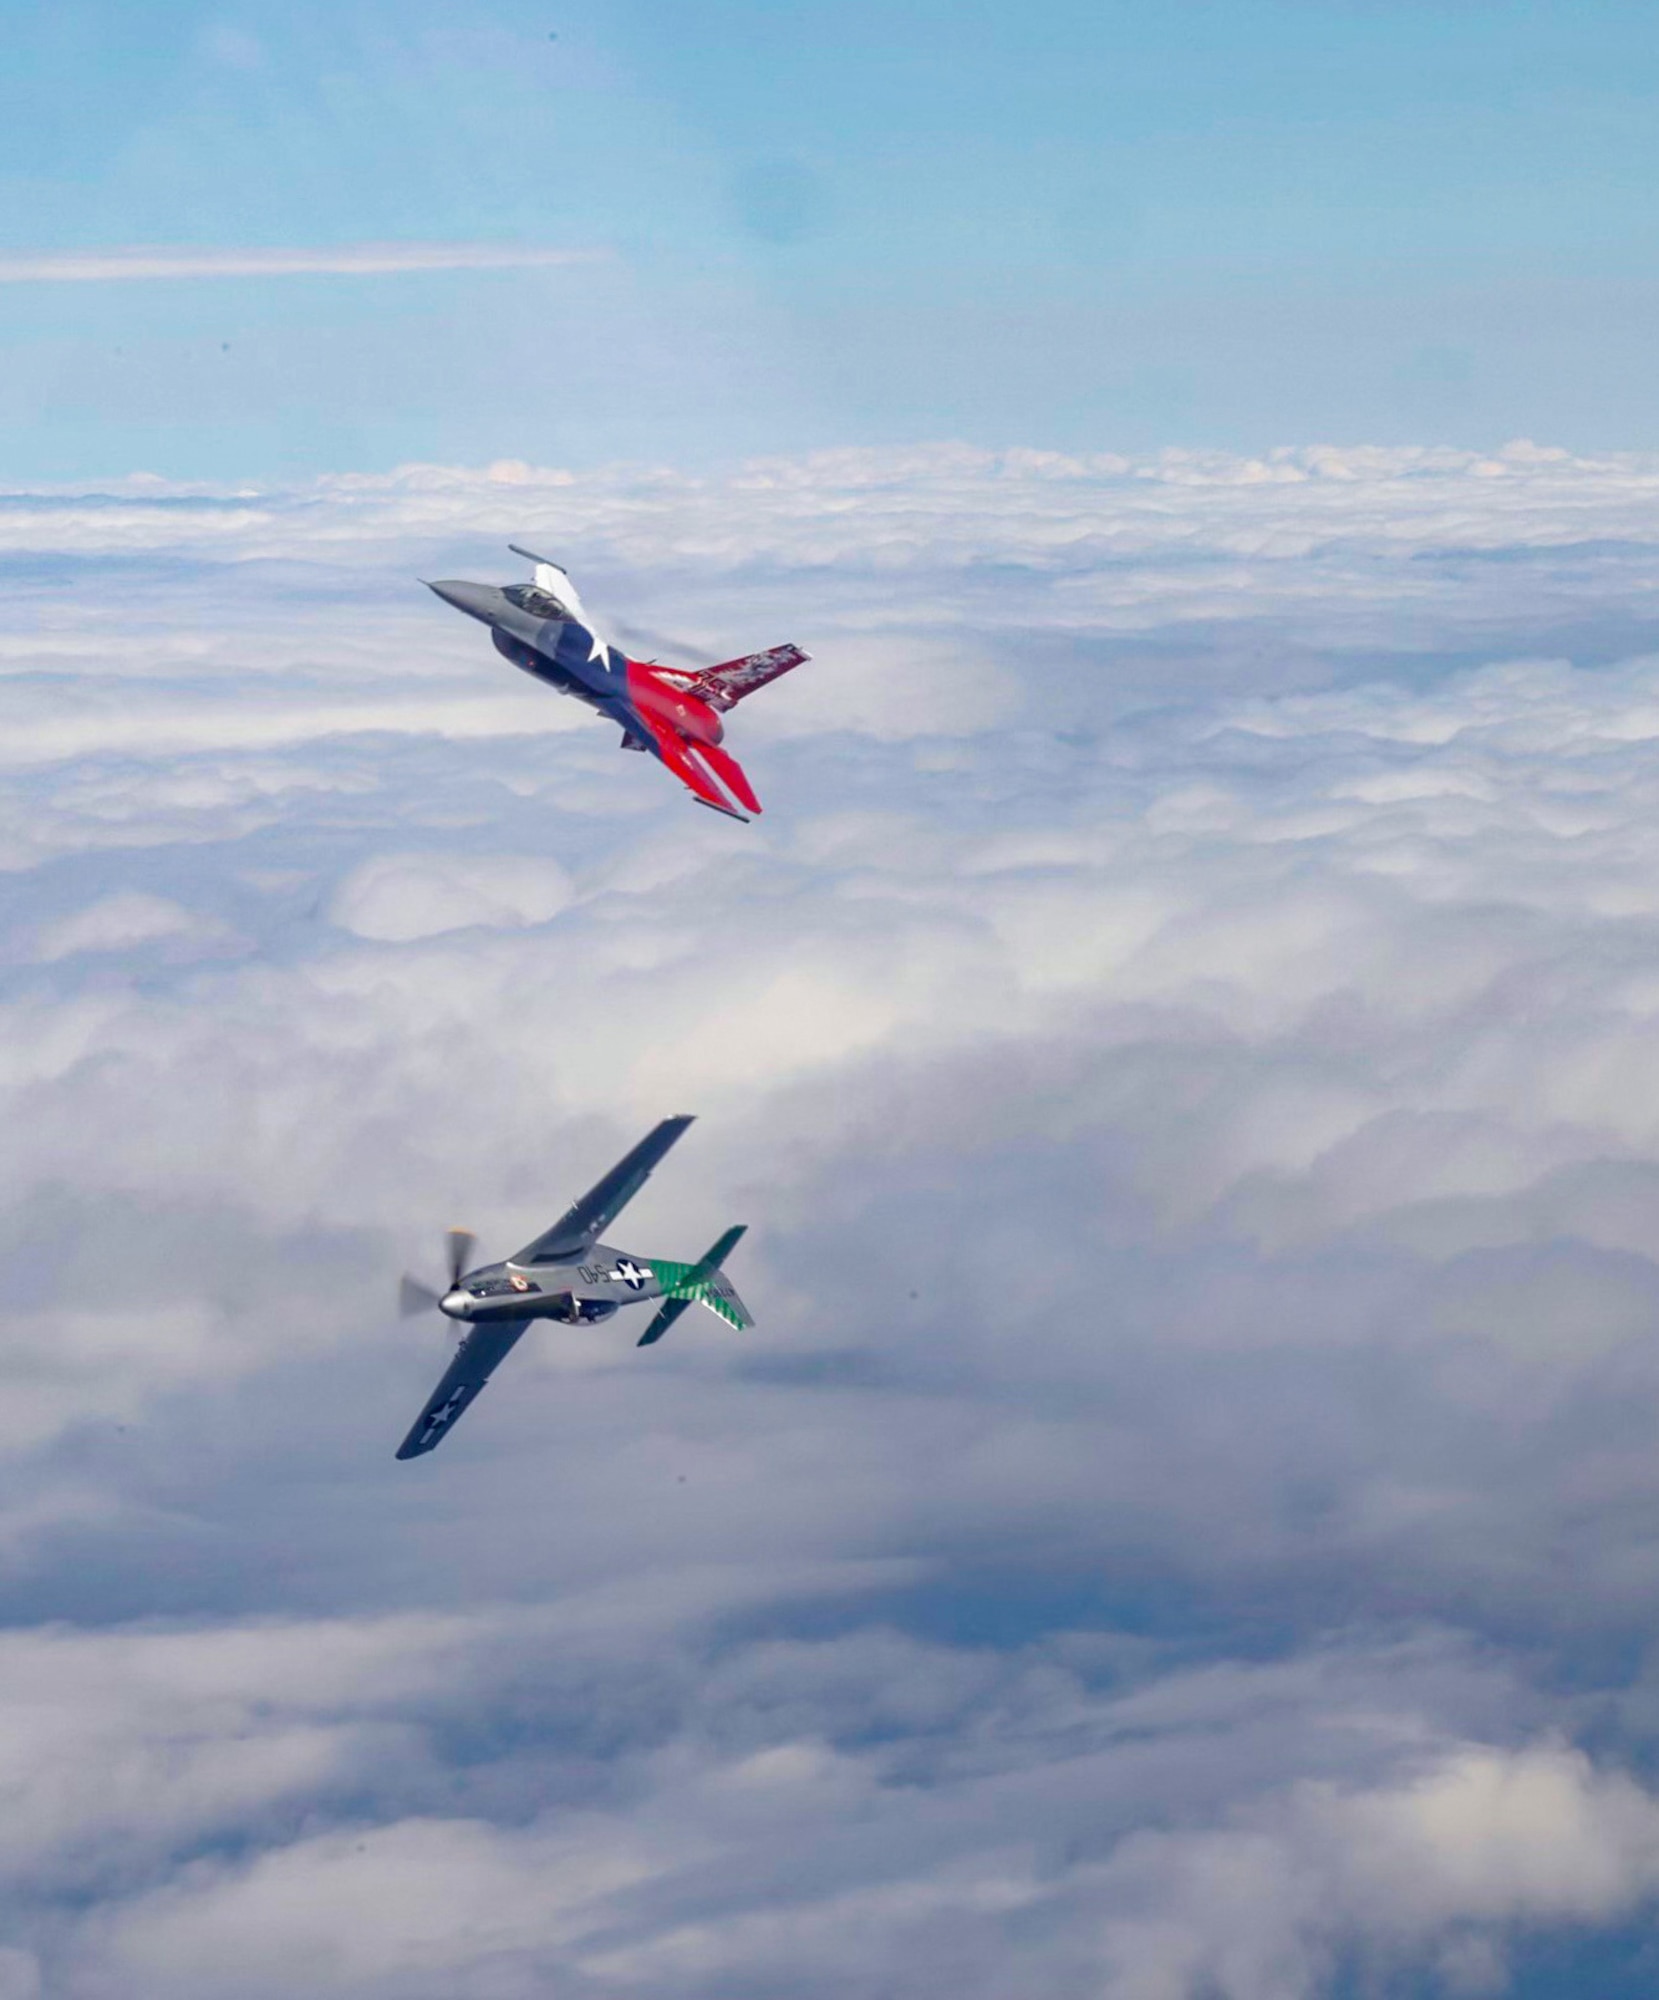 A P-51 Mustang and a 457th Fighter Squadron F-16 Fighting Falcon fly over the U.S. east coast Friday, April 16, 2021. The flight commemorated the 75th anniversary of the squadron, which was activated on Oct. 21, 1944. The P-51 was the first aircraft assigned to the squadron. (U.S. Air Force photo by 1st Lt. Savanah Bray)